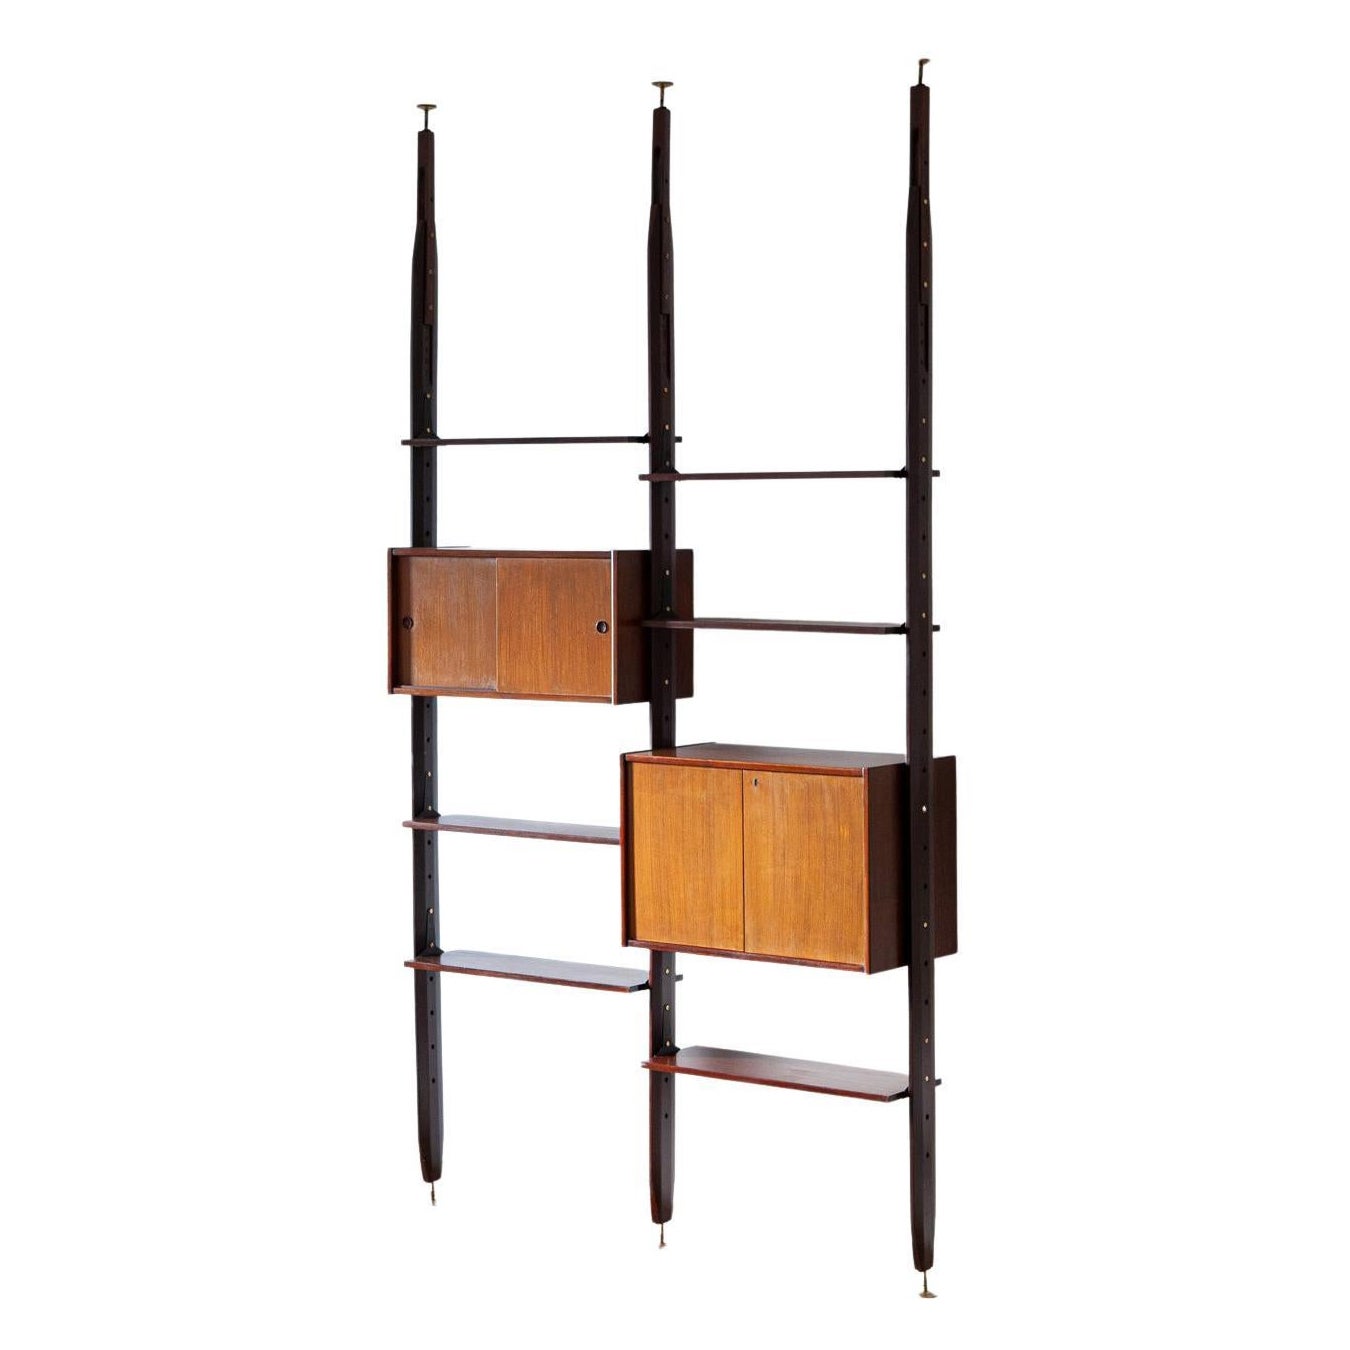 Floor to Ceiling Wall Unit, Exotic Wood, 1950s Italian Modern Design 